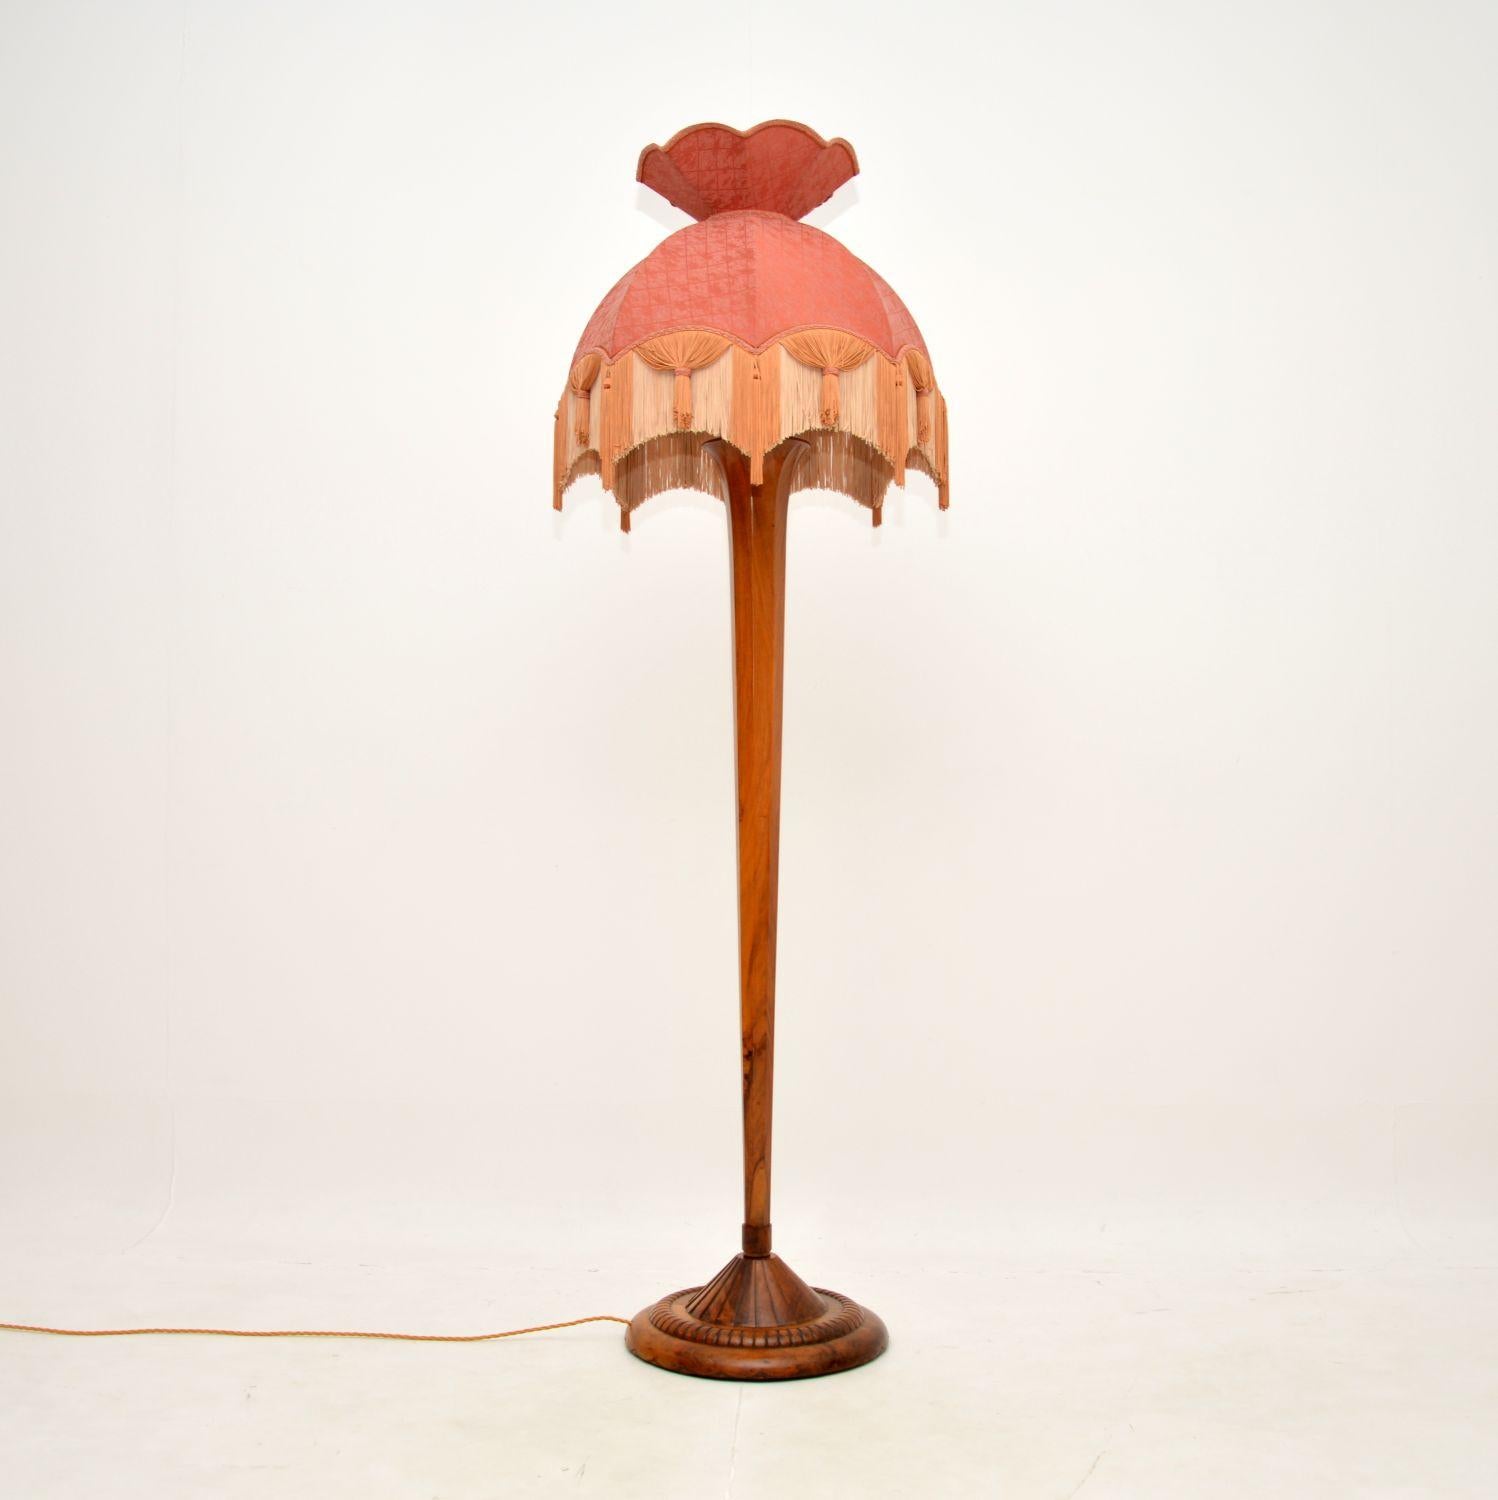 An absolutely stunning and very impressive Art Deco floor lamp in solid walnut. This was made in England, it dates from around the 1920-30’s.

It is of exceptional quality, with a very bold and beautiful design. The stand has a lovely tapered shape